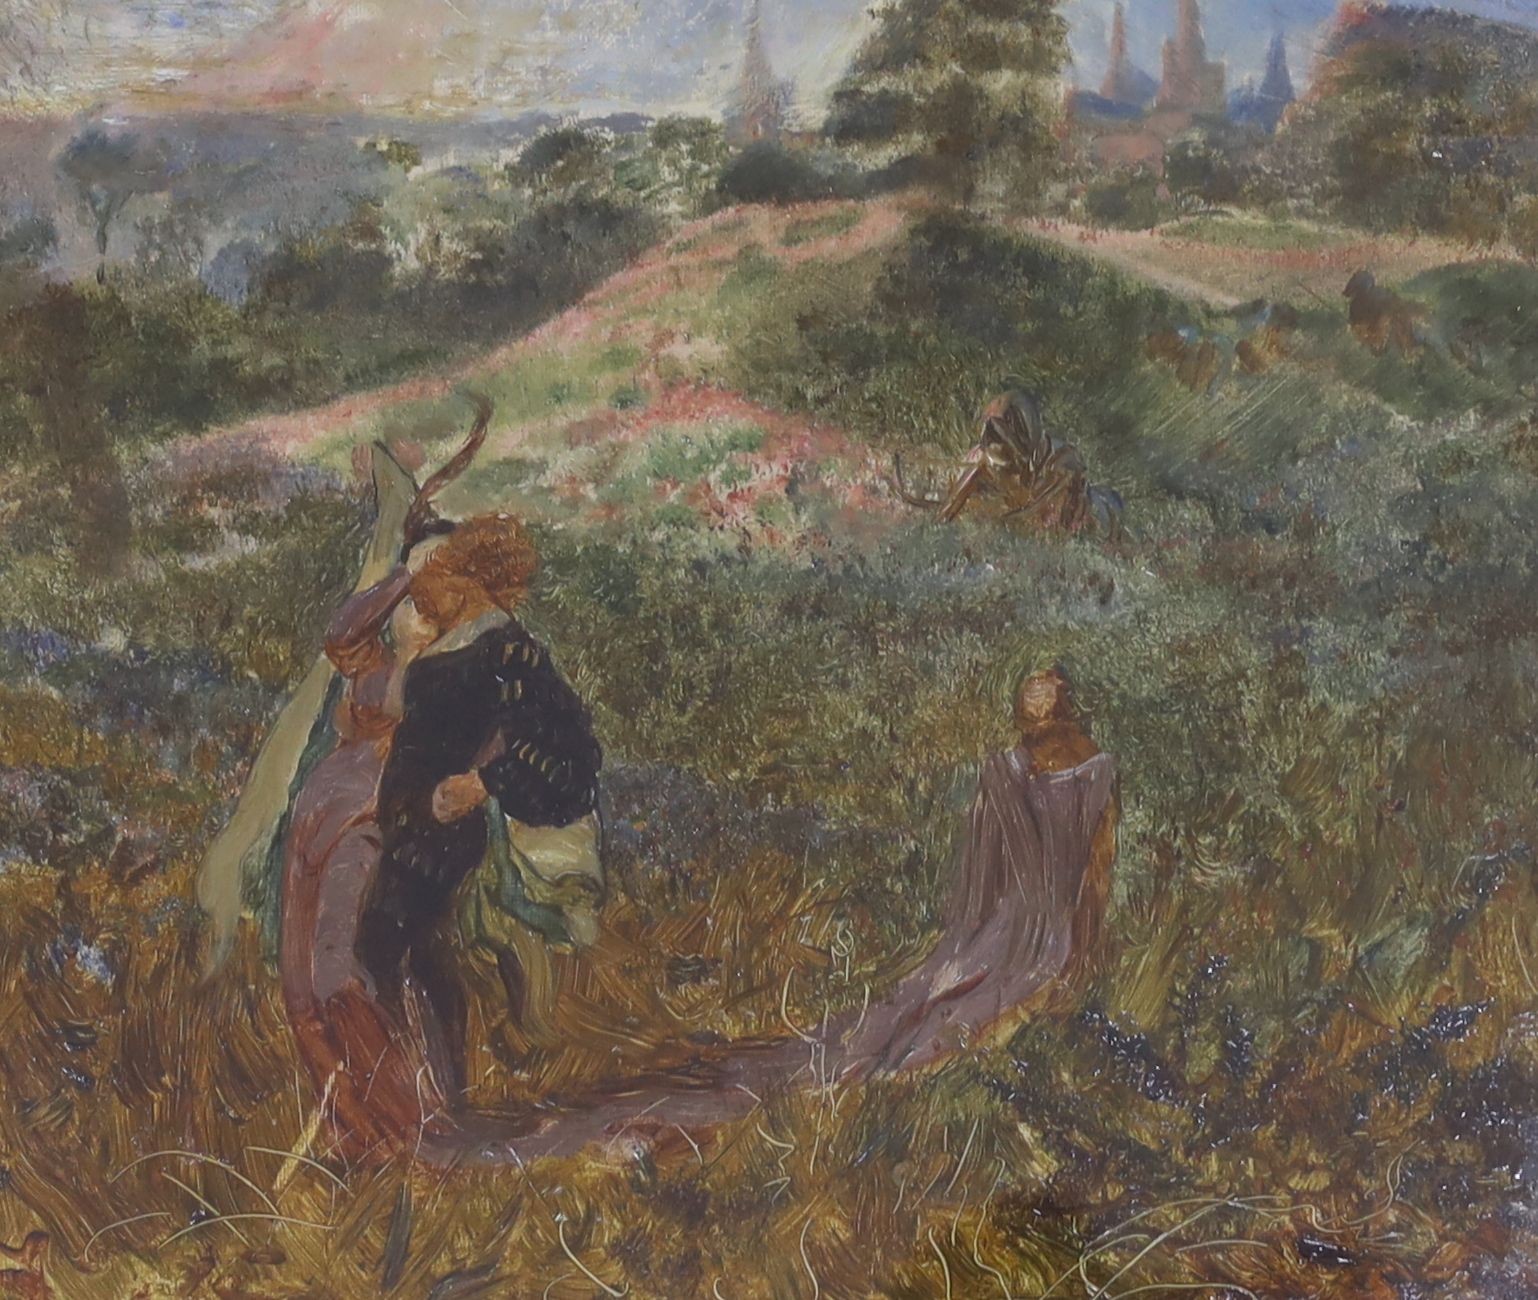 Arthur Boyd Houghton (1836-1875) - oil on canvas, 'The Romance of a Crusader - a medieval landscape', label verso from Hartnoll & Eyre Ltd., 25 x 29cm